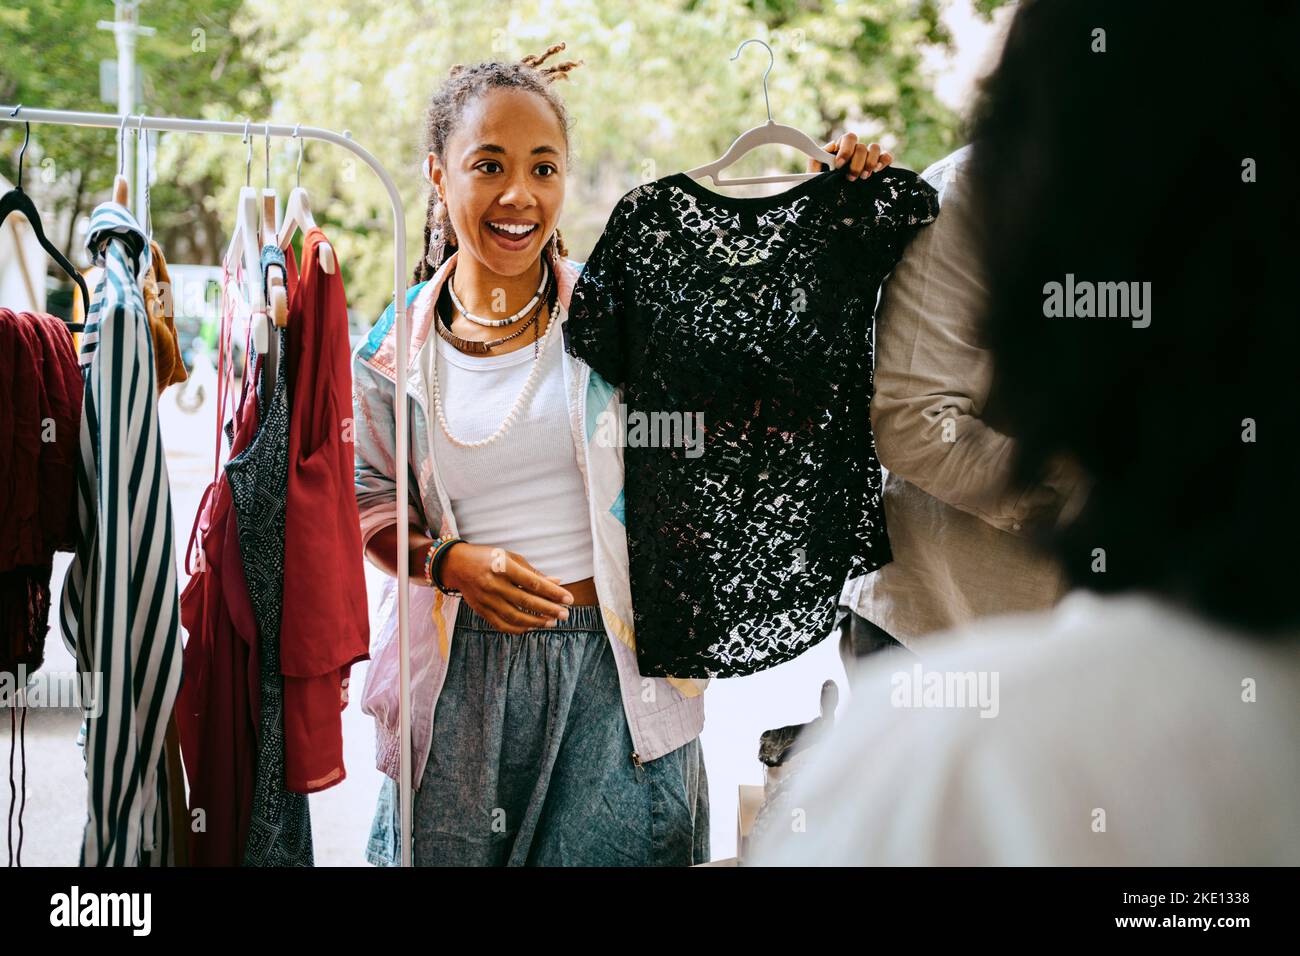 Excited female customer holding dress while talking to merchant at flea market Stock Photo